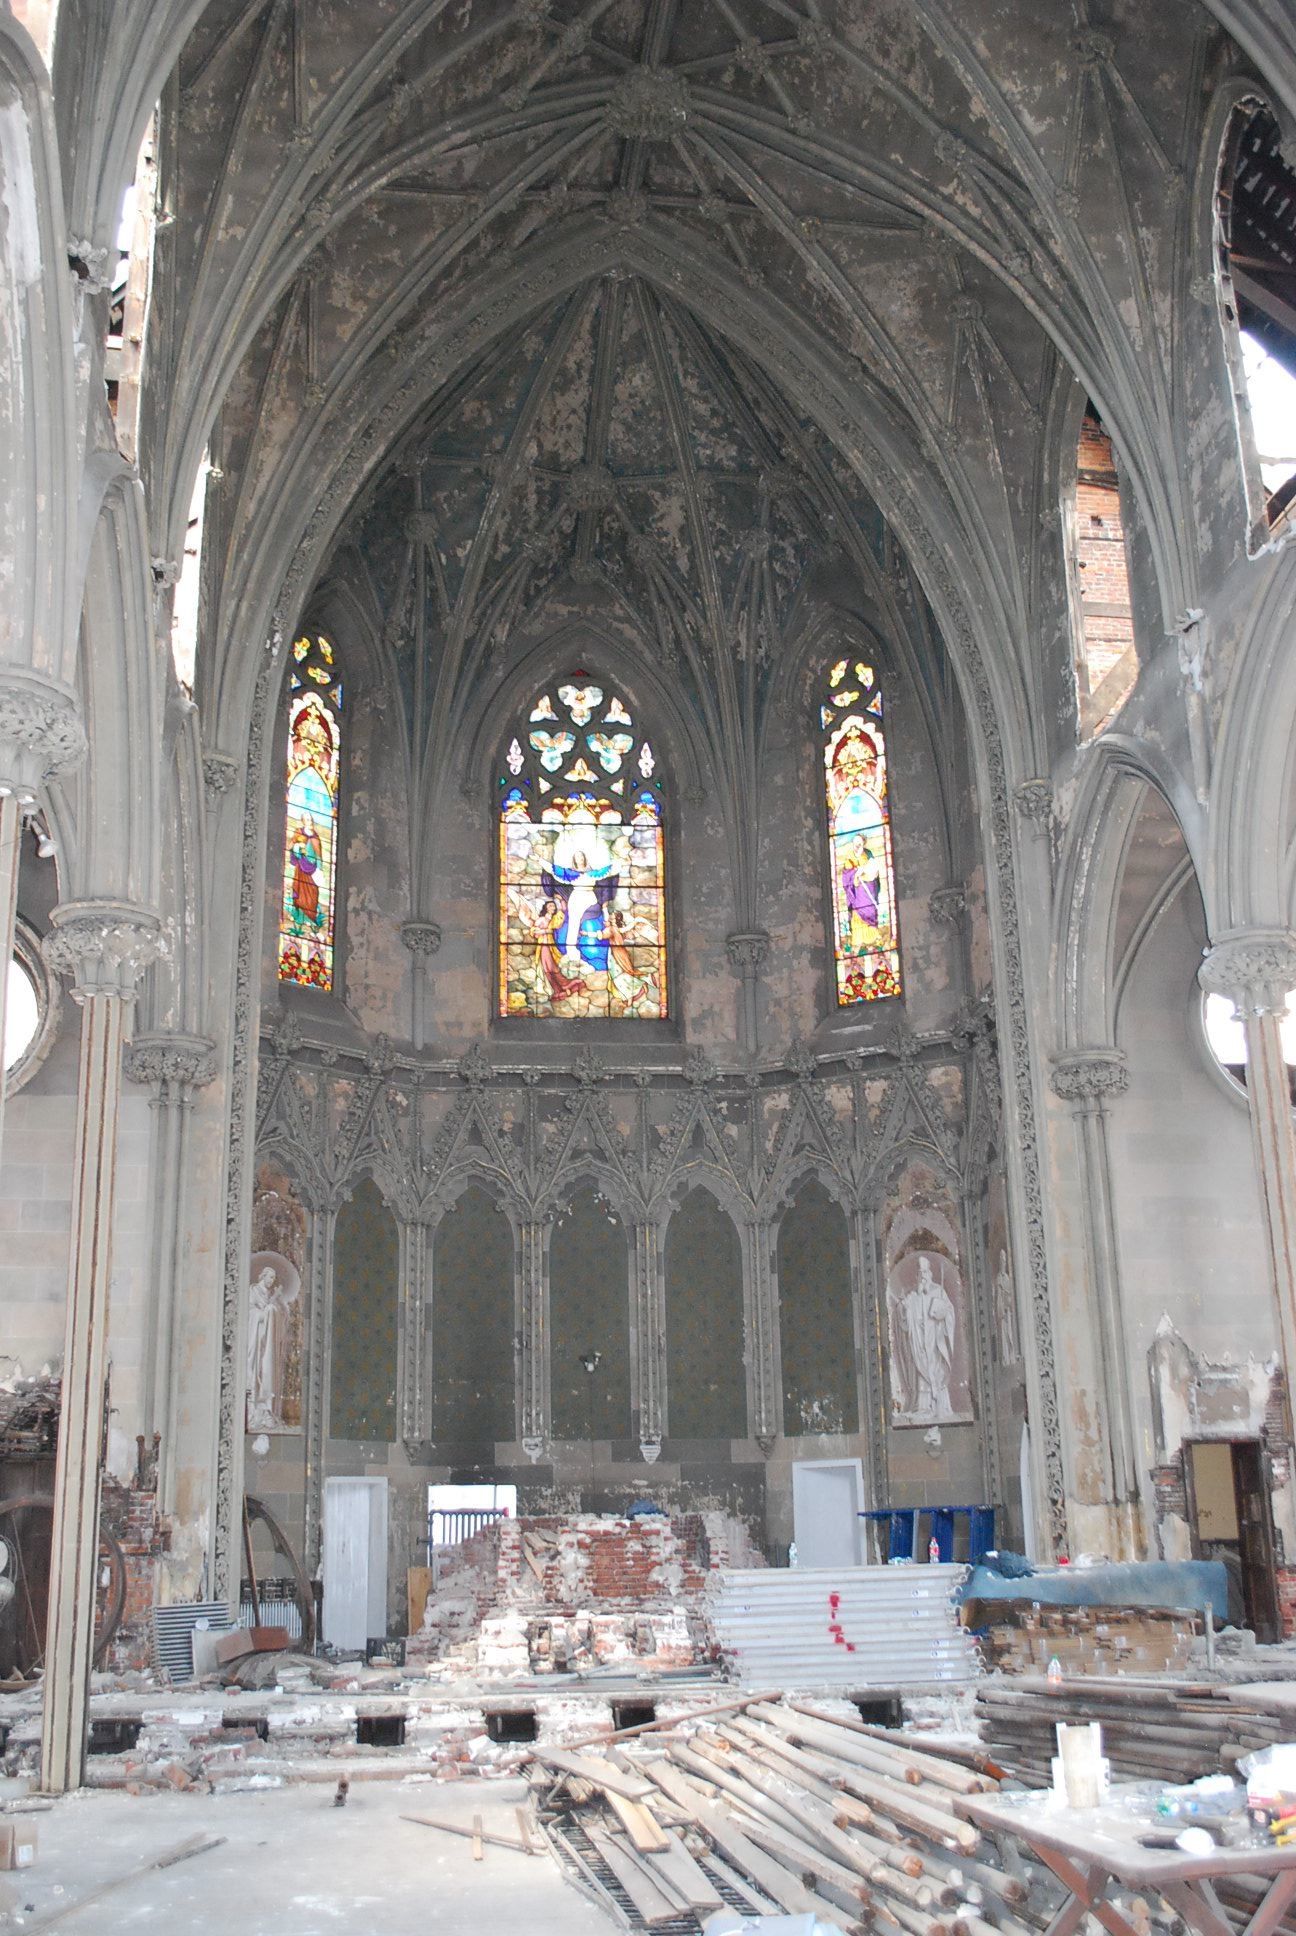 A view of the church interior after Siloam began demolition.